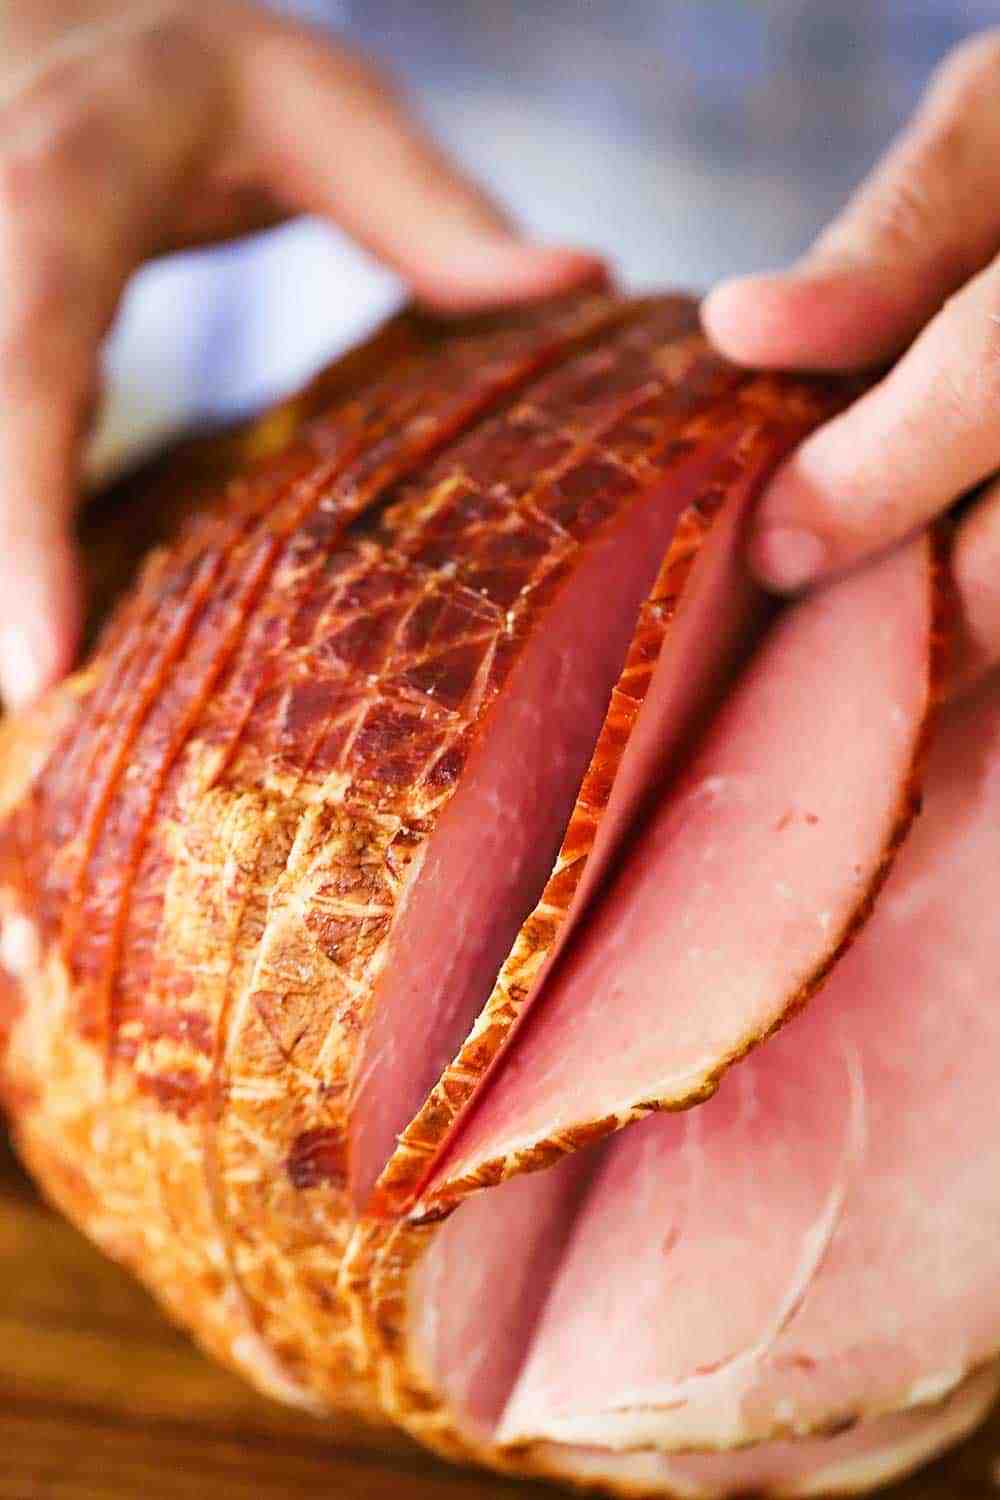 How do you tell if a ham is fully cooked?